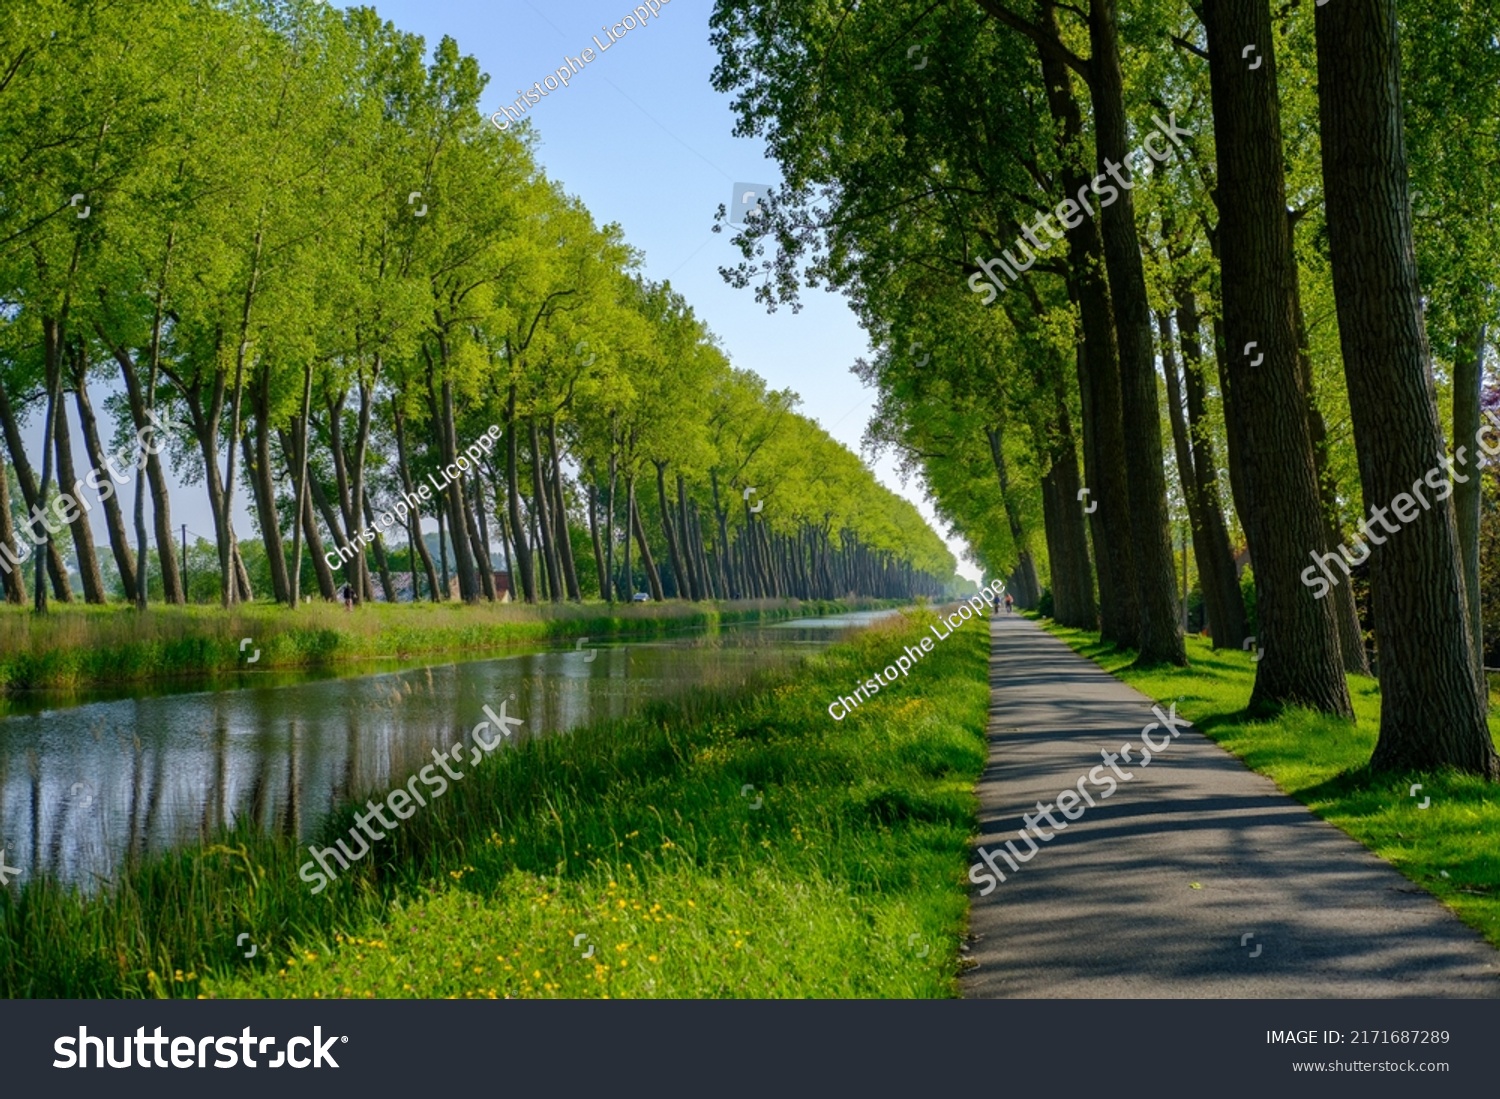 Damme Canal. The canal is located in the province of West Flanders in Belgium. It connects the city of Bruges with the Dutch city of L'Écluse #2171687289